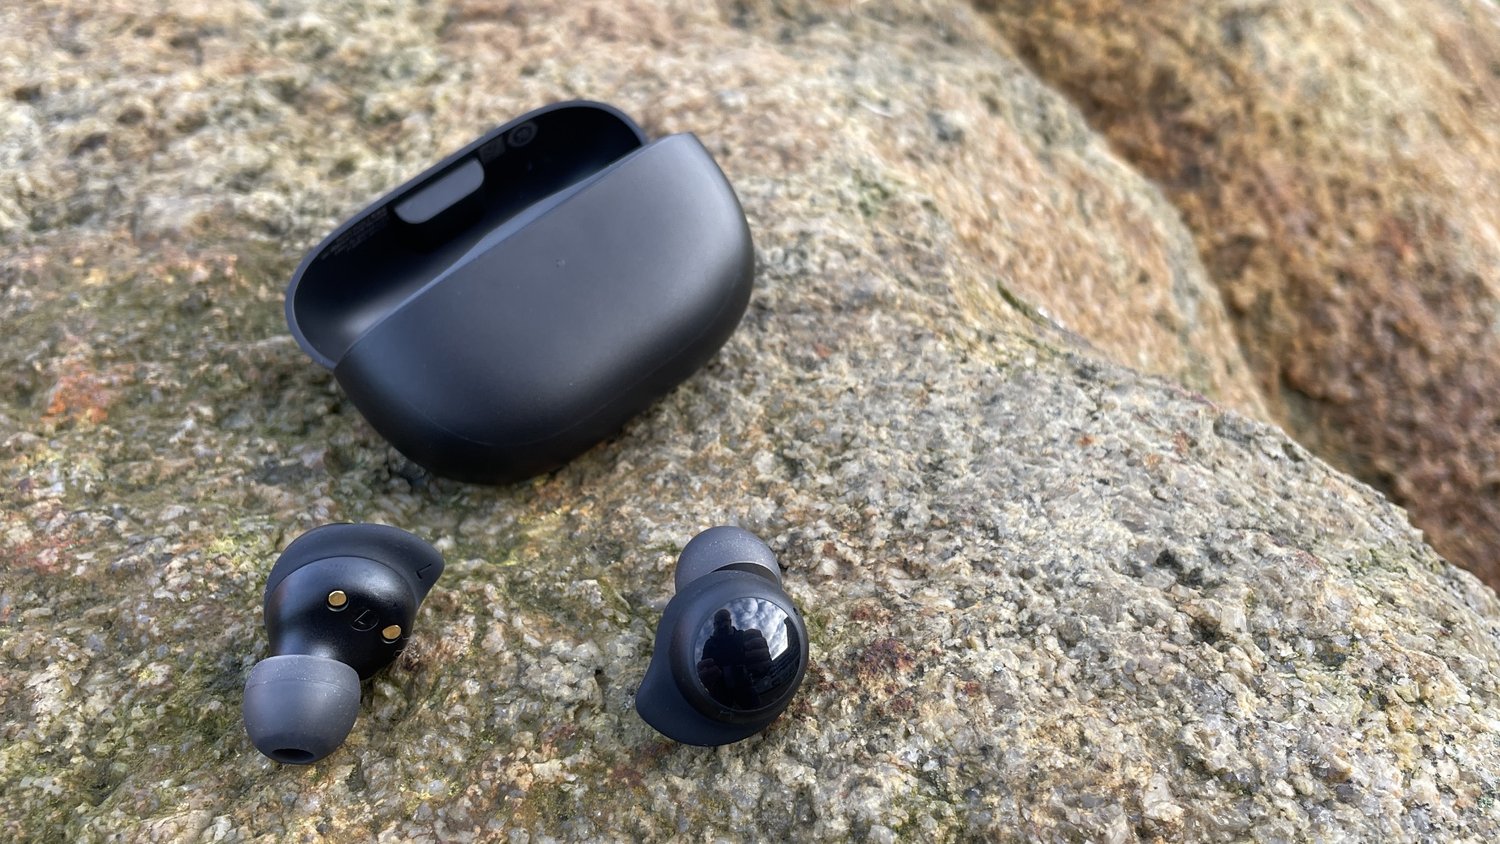 3 for Best review: Lite sleeping Redmi earbuds Buds cheap